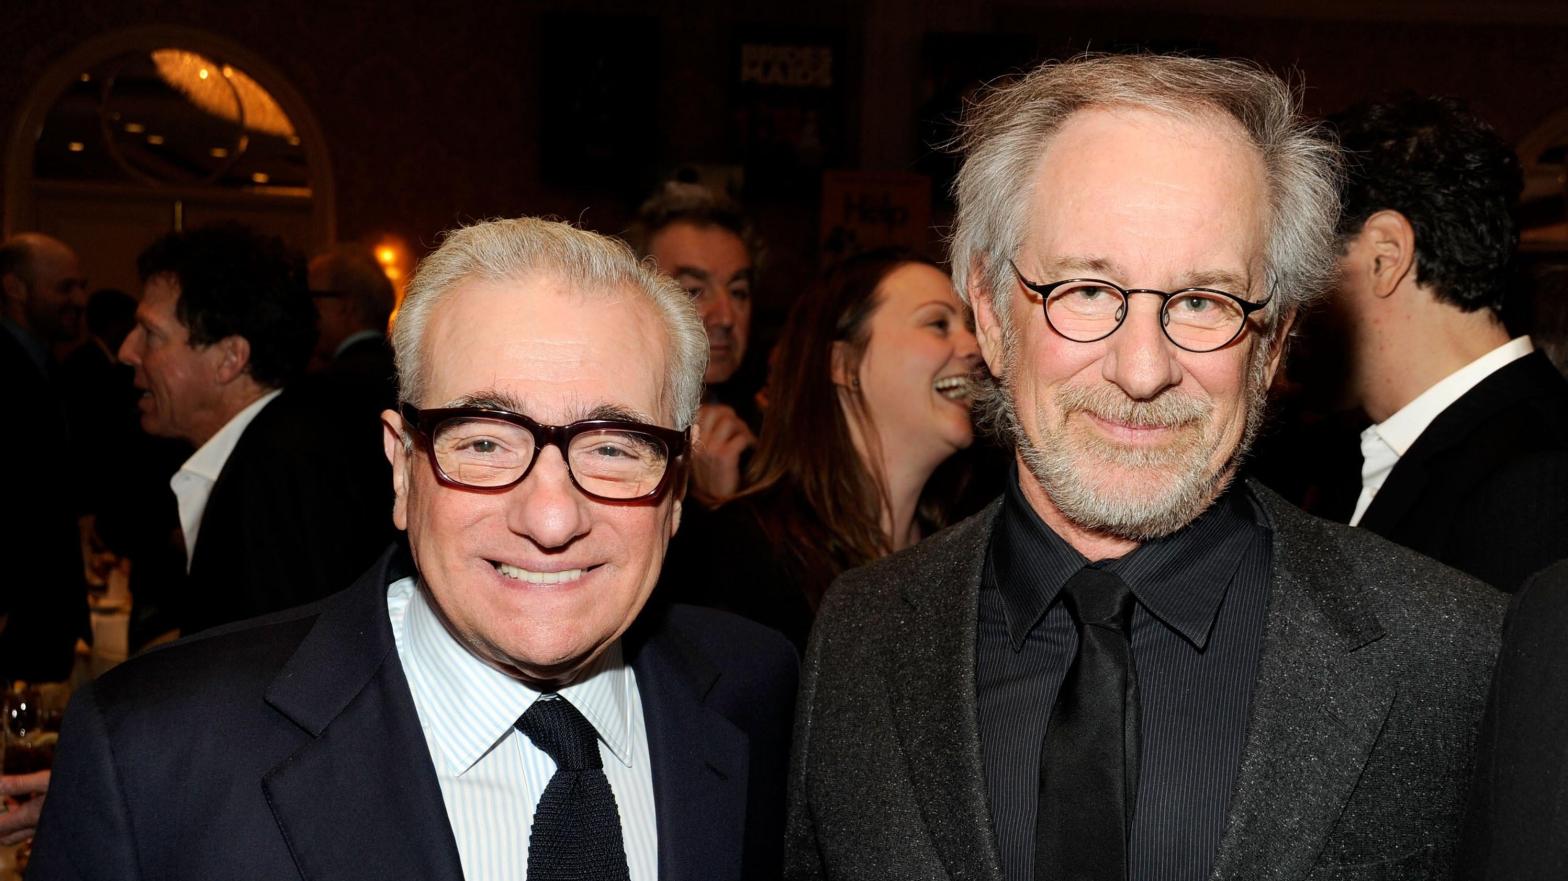 Martin Scorsese and Steven Spielberg, along with Paul Thomas Anderson, will now be part-time stewards of Turner Classic Movies alongside Warner Bros. film execs Mike De Luca and Pam Abdy. (Photo: Frazer Harrison, Getty Images)